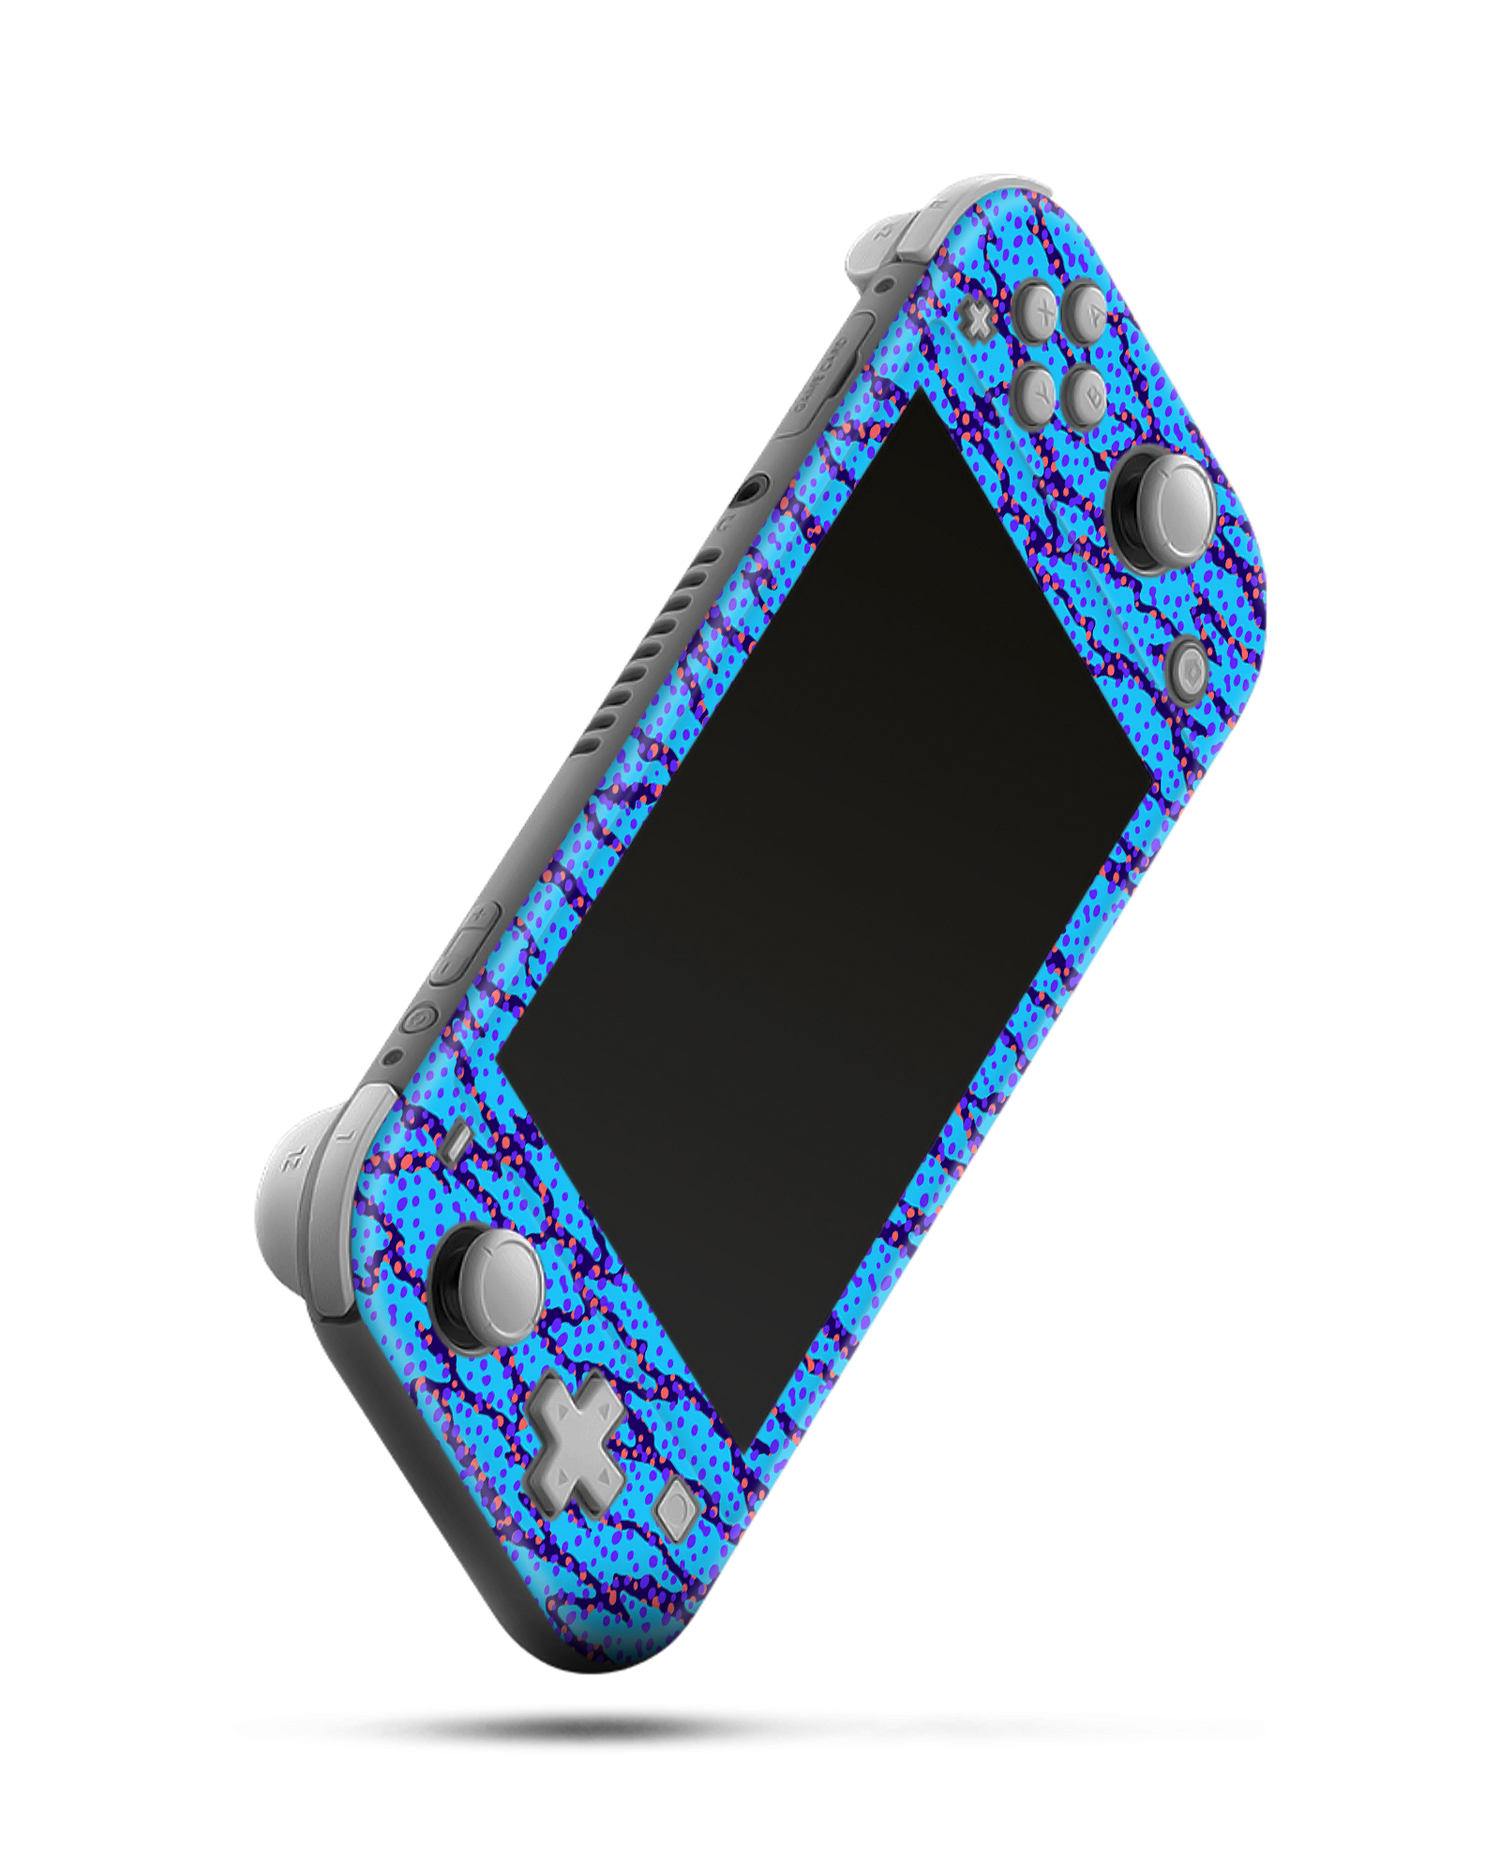 Electric Ocean Console Skin for Nintendo Switch Lite: Side view